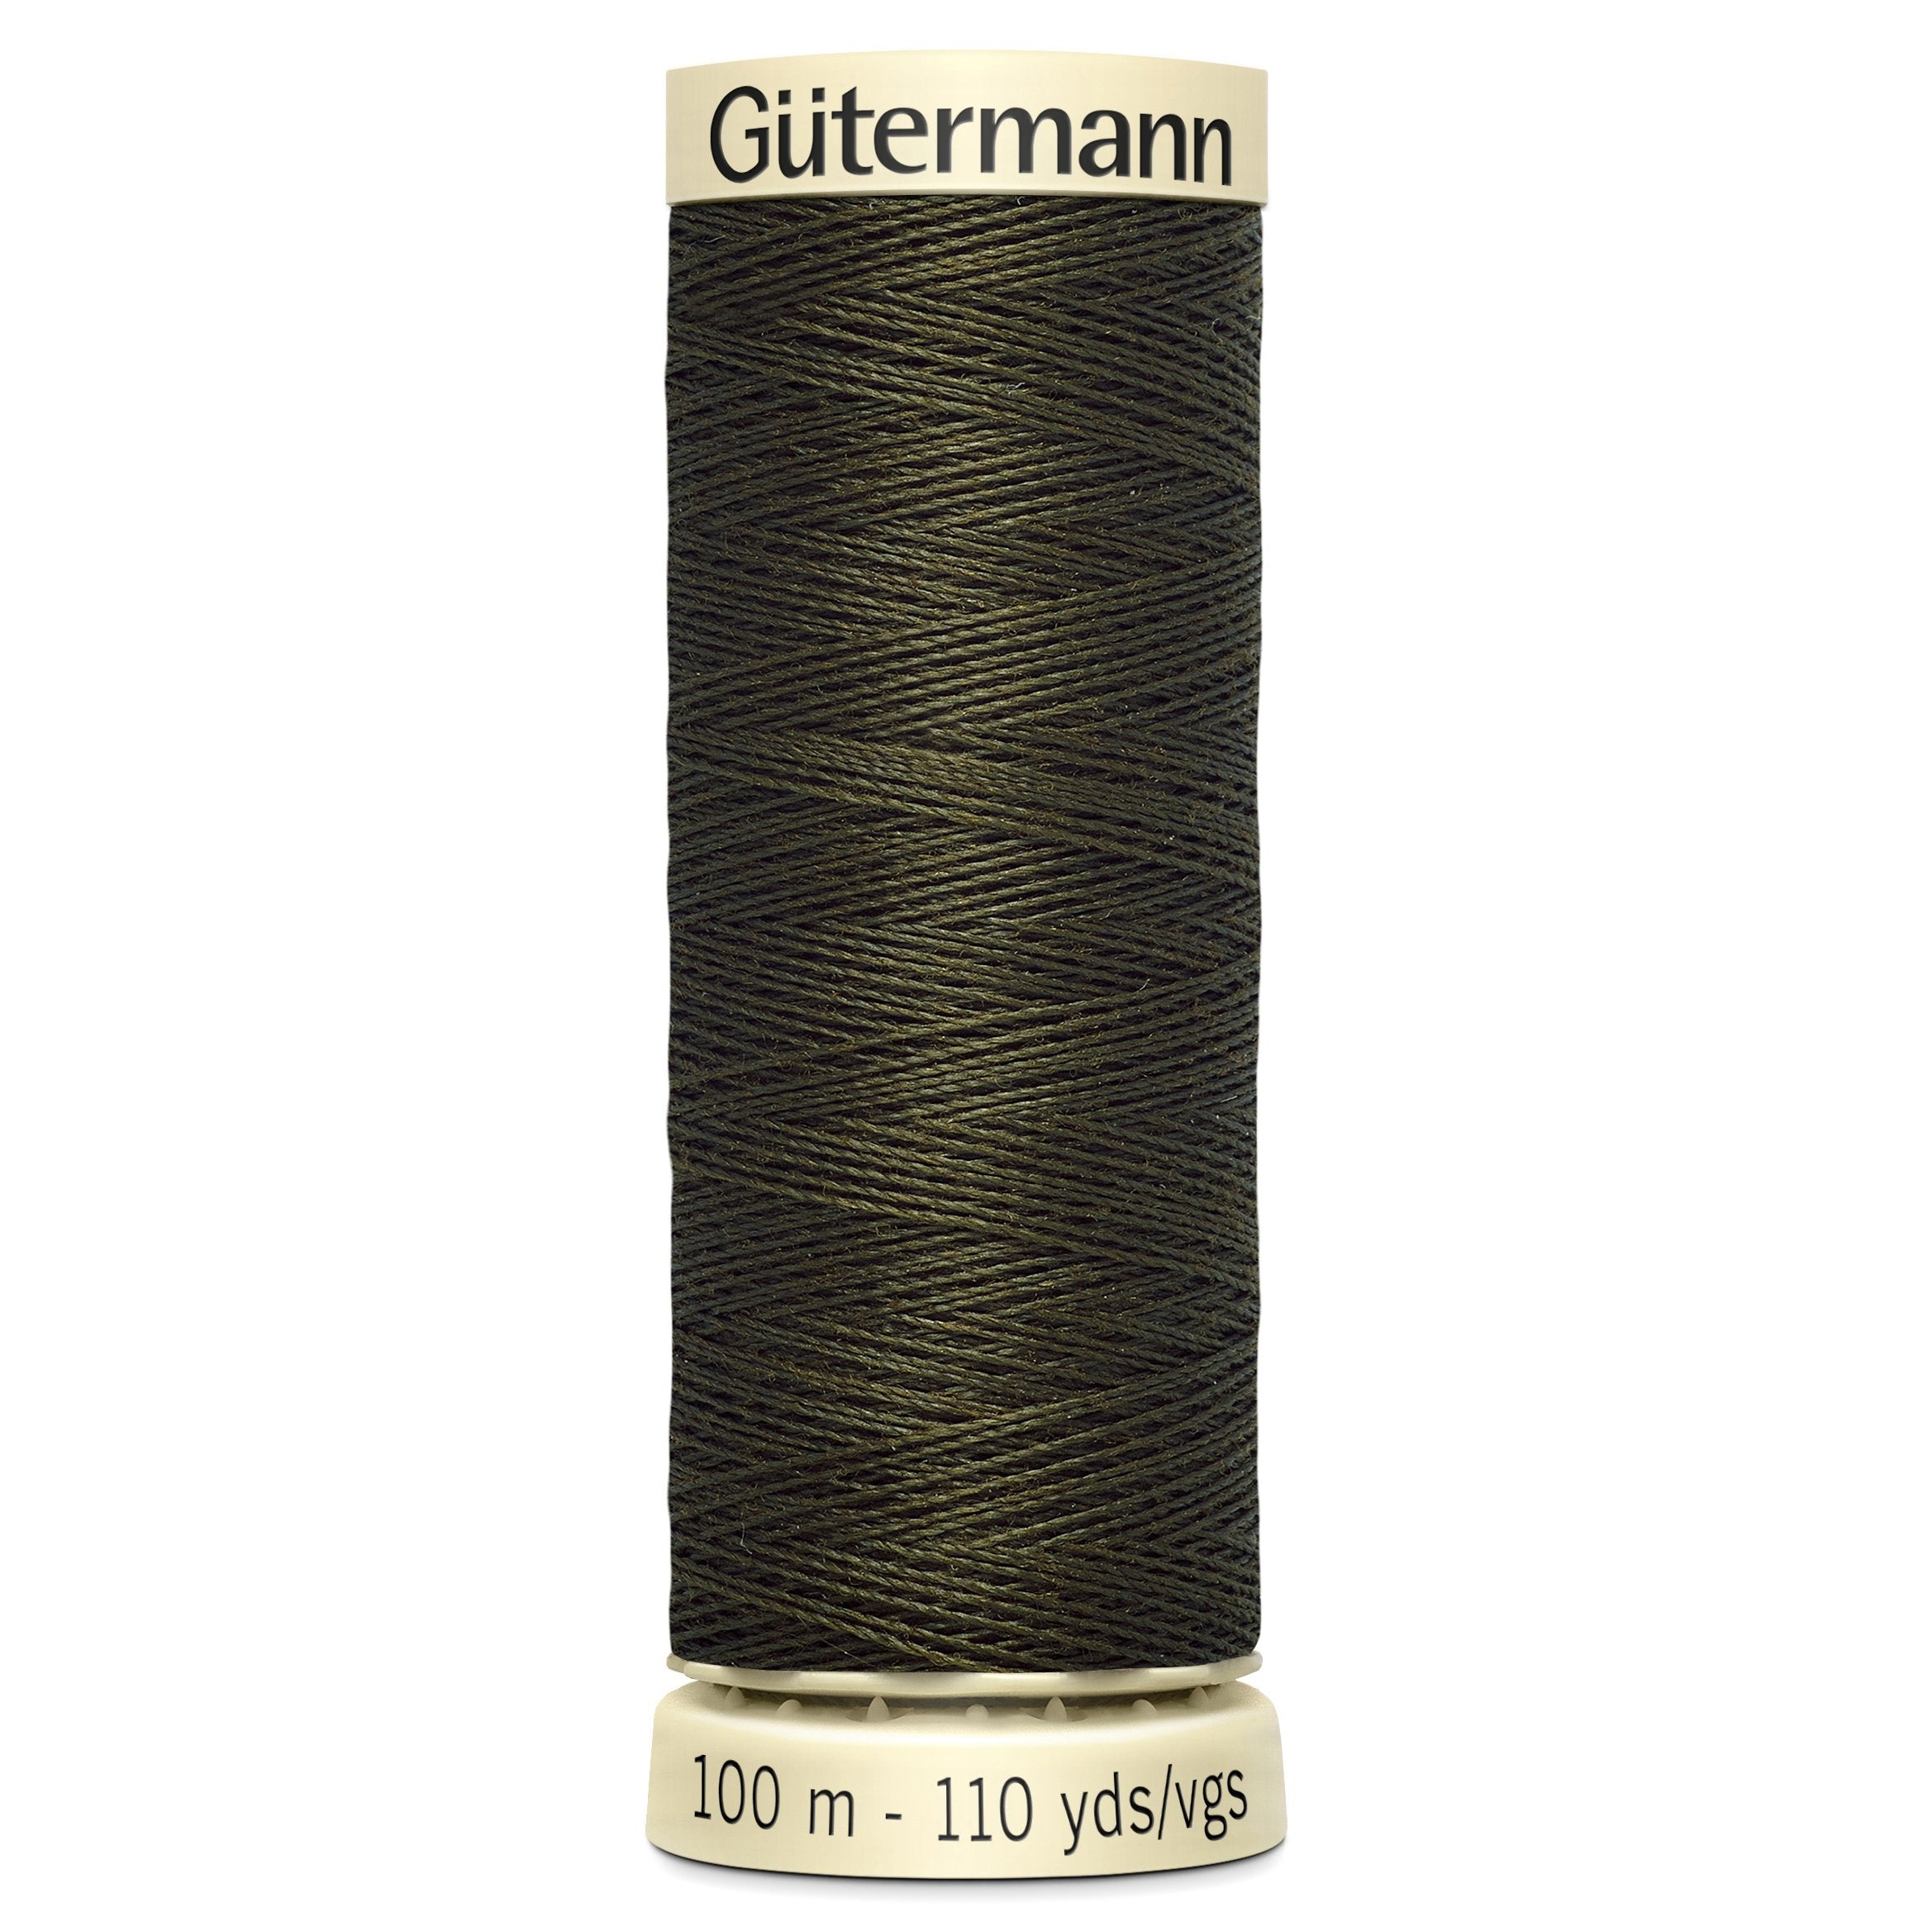 Gutermann Sew All Thread colour 531 Dark Green from Jaycotts Sewing Supplies